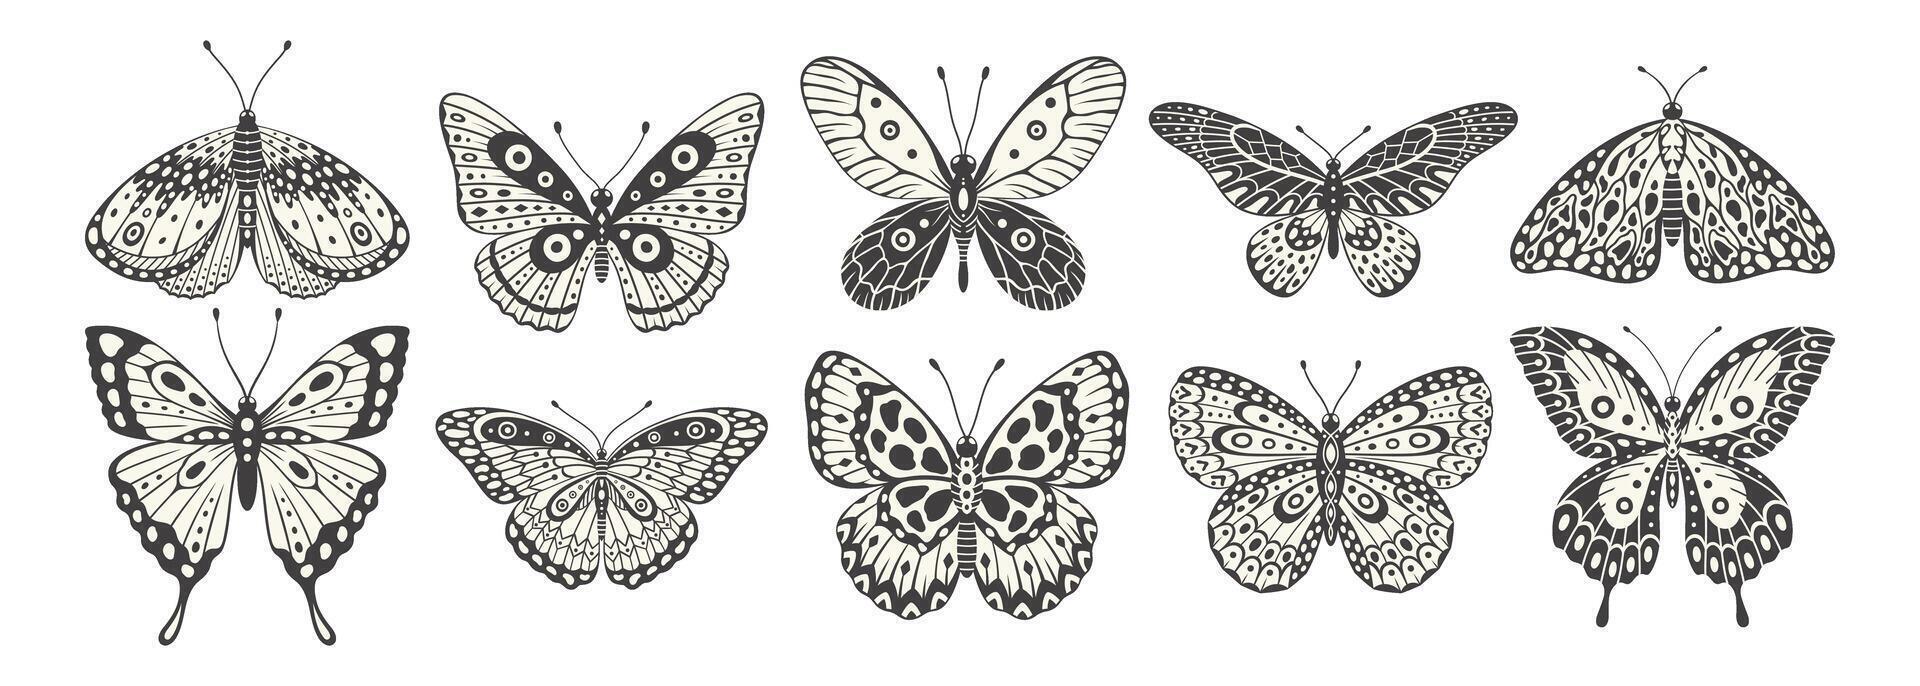 Butterfly and moth set, vector. Y2k style aesthetic, wing shapes in front view, magic symbols collection, abstract illustration. Black and white tattoo print vector